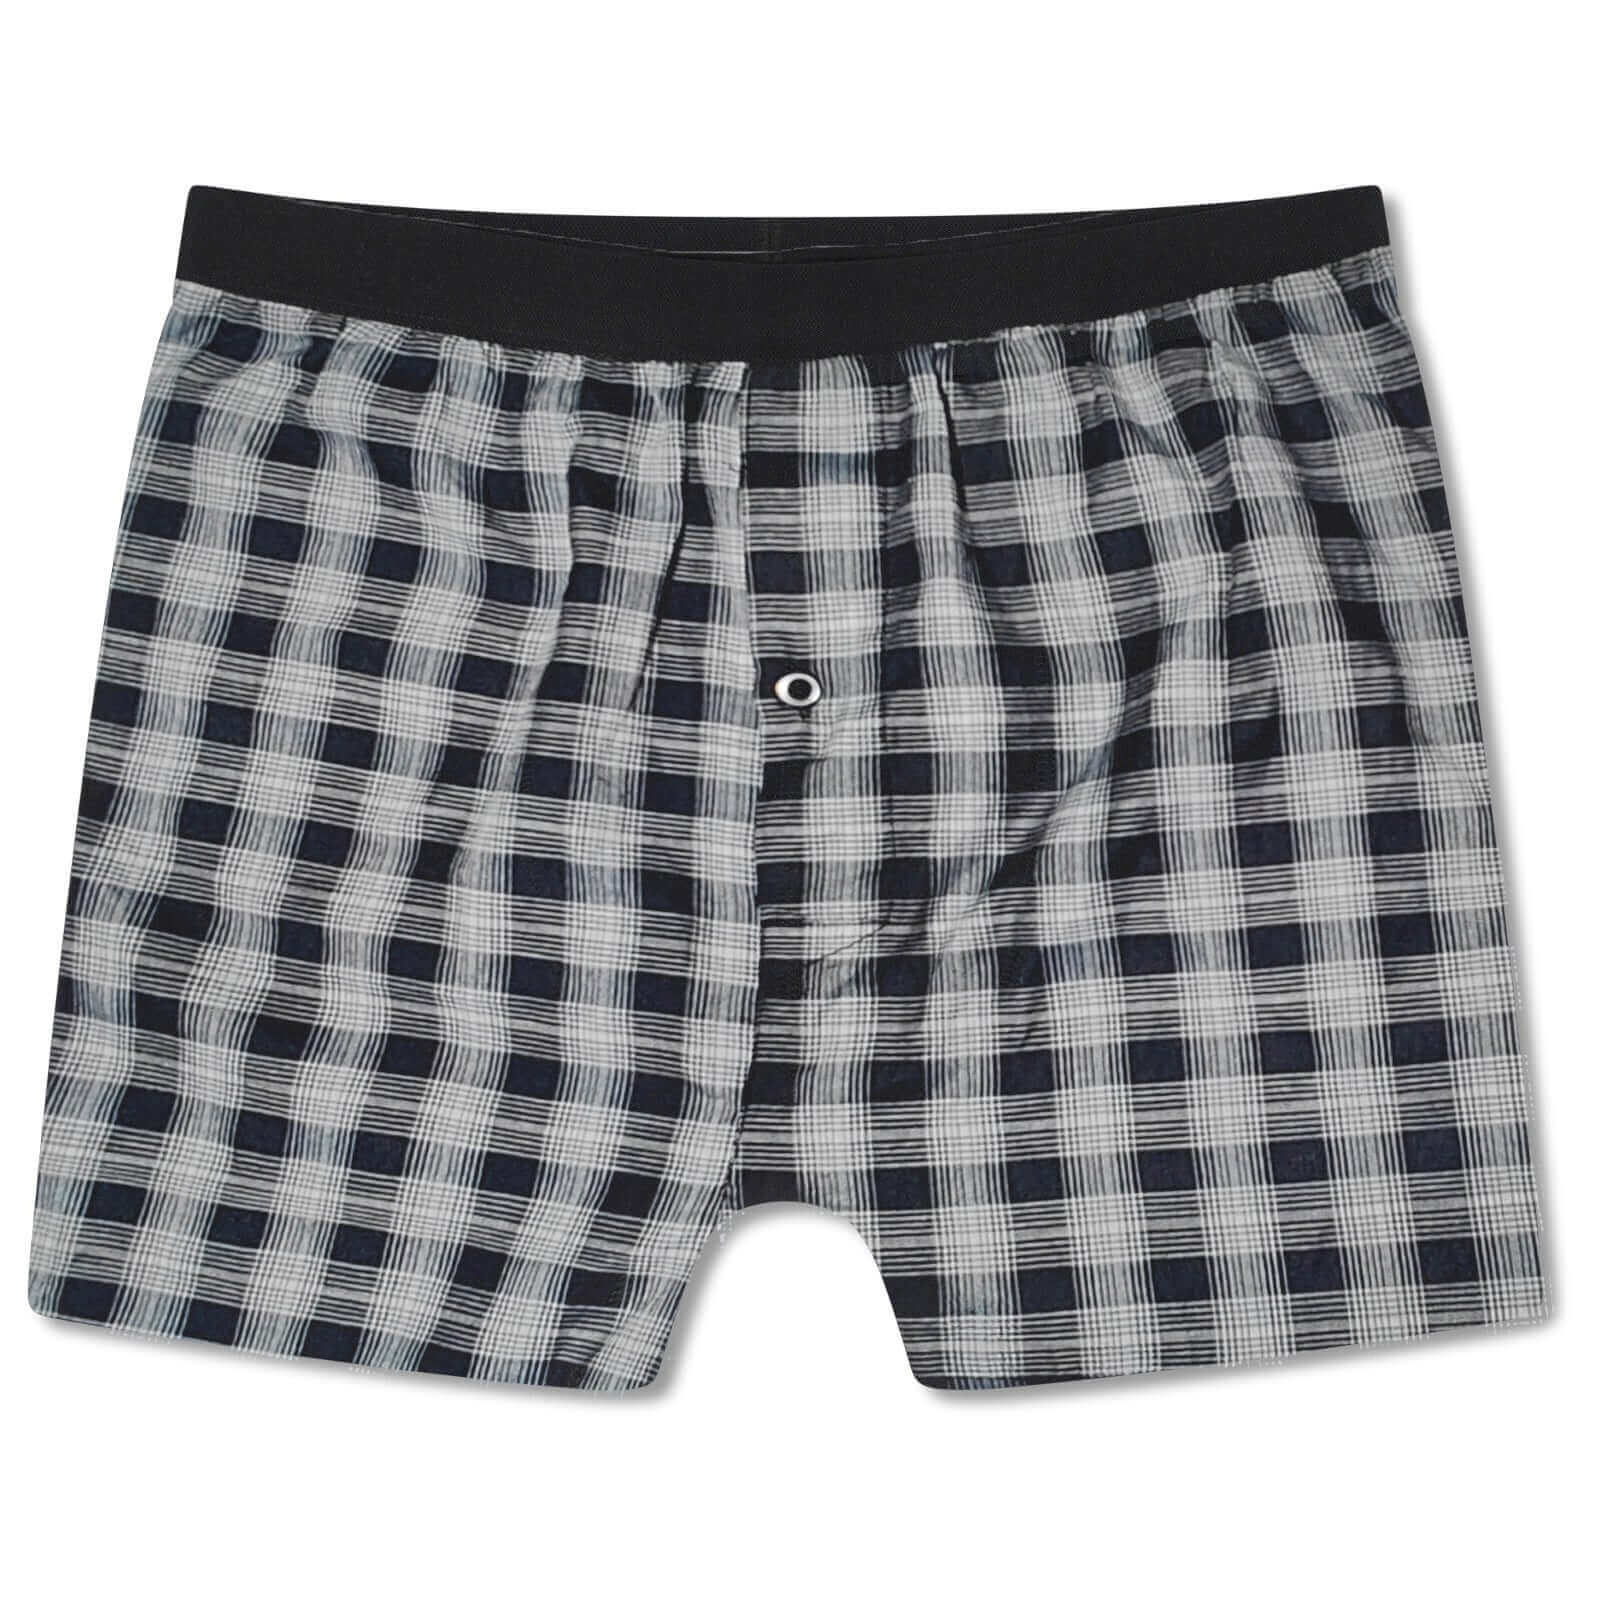 Pack Of 6 Men's Woven Boxers, Loose Fit Boxershorts, Comfort Waistband Underwear (MB02). Buy now for £8.00. A Boxer Shorts by Sock Stack. black, blue, boxer shorts, check, classic boxers, comfortable, cotton, cotton blend, grey, marl grey, mens, navy, red